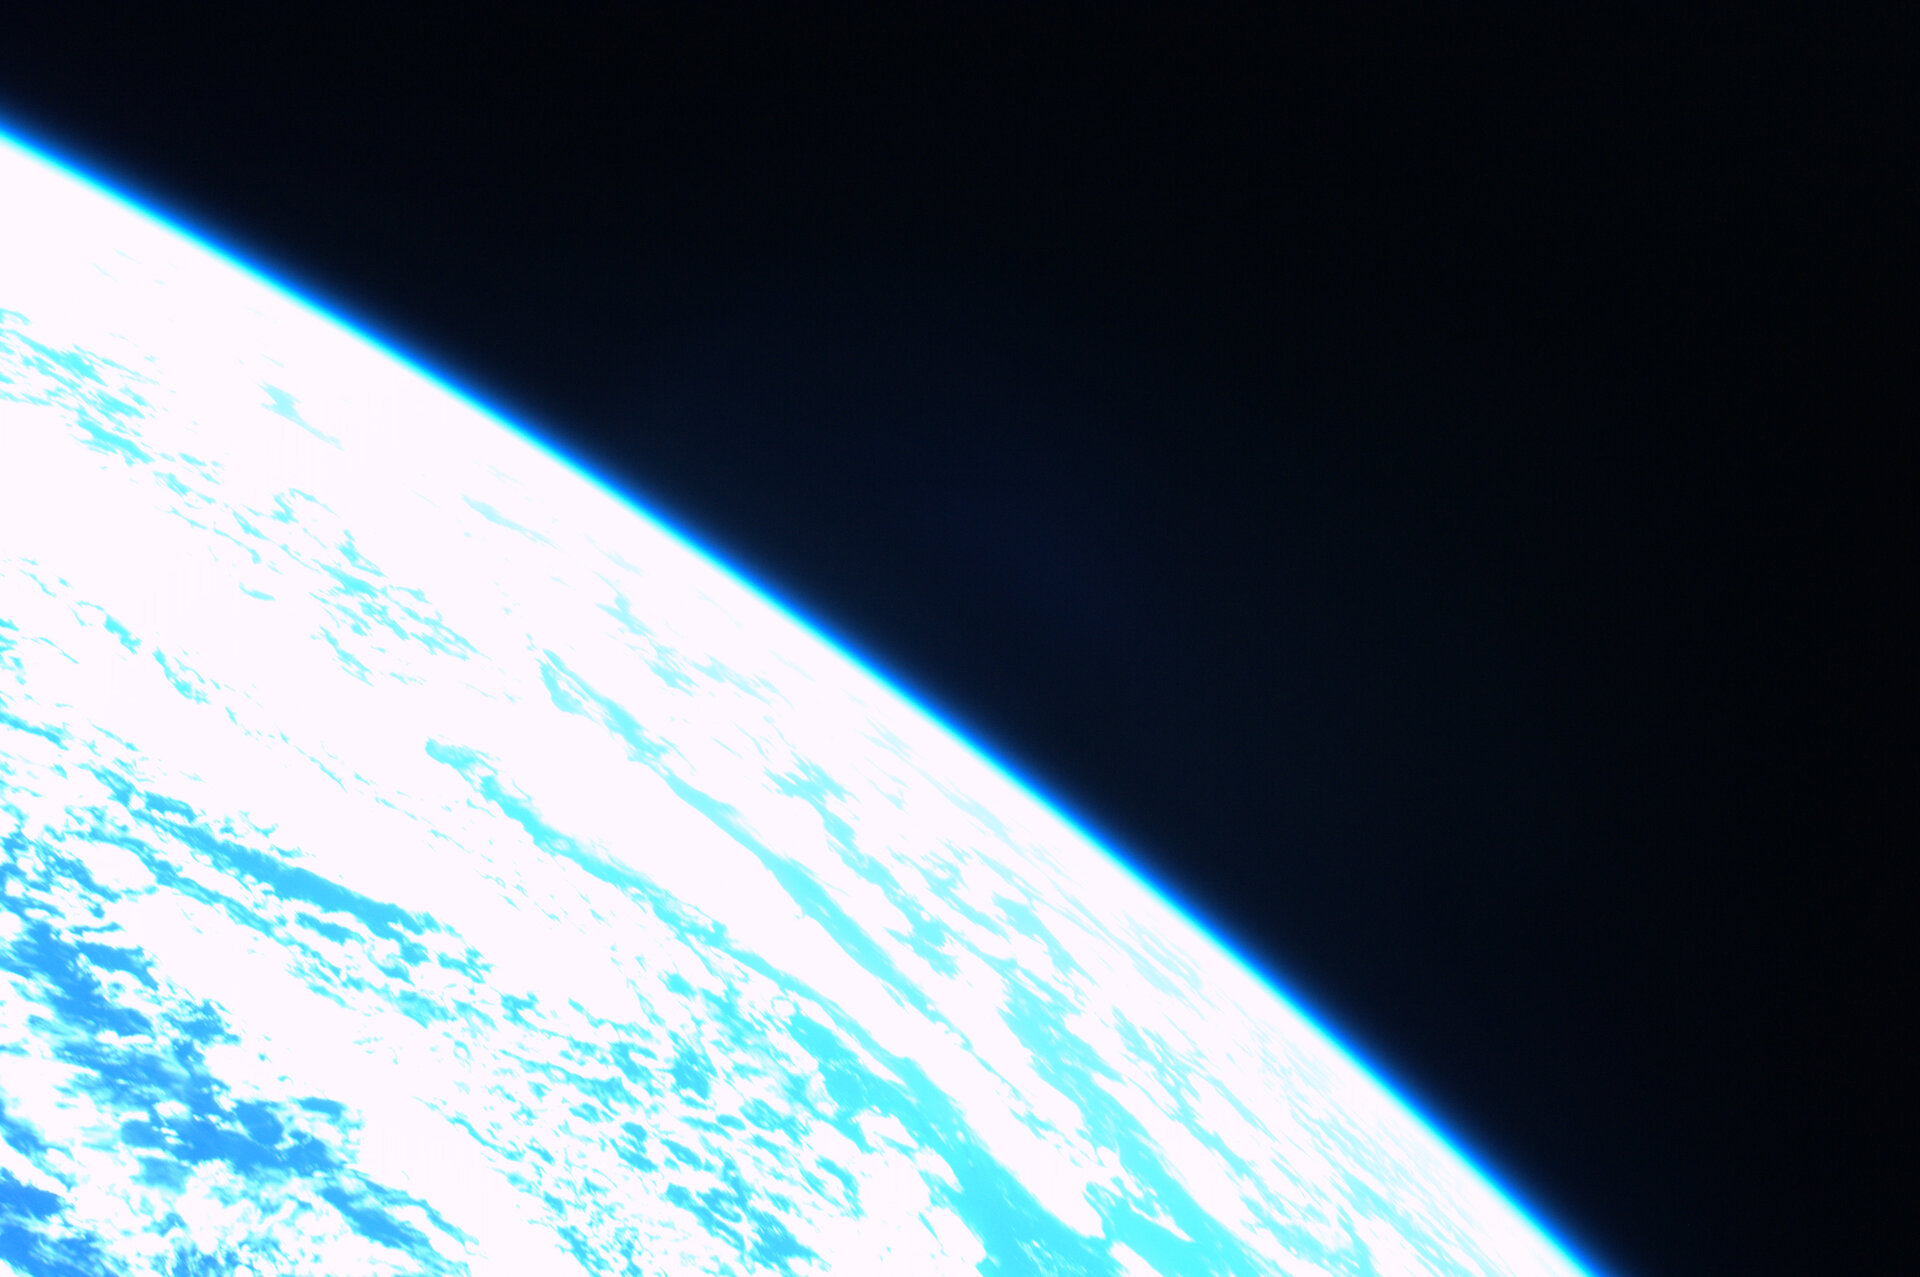 Last view of Earth